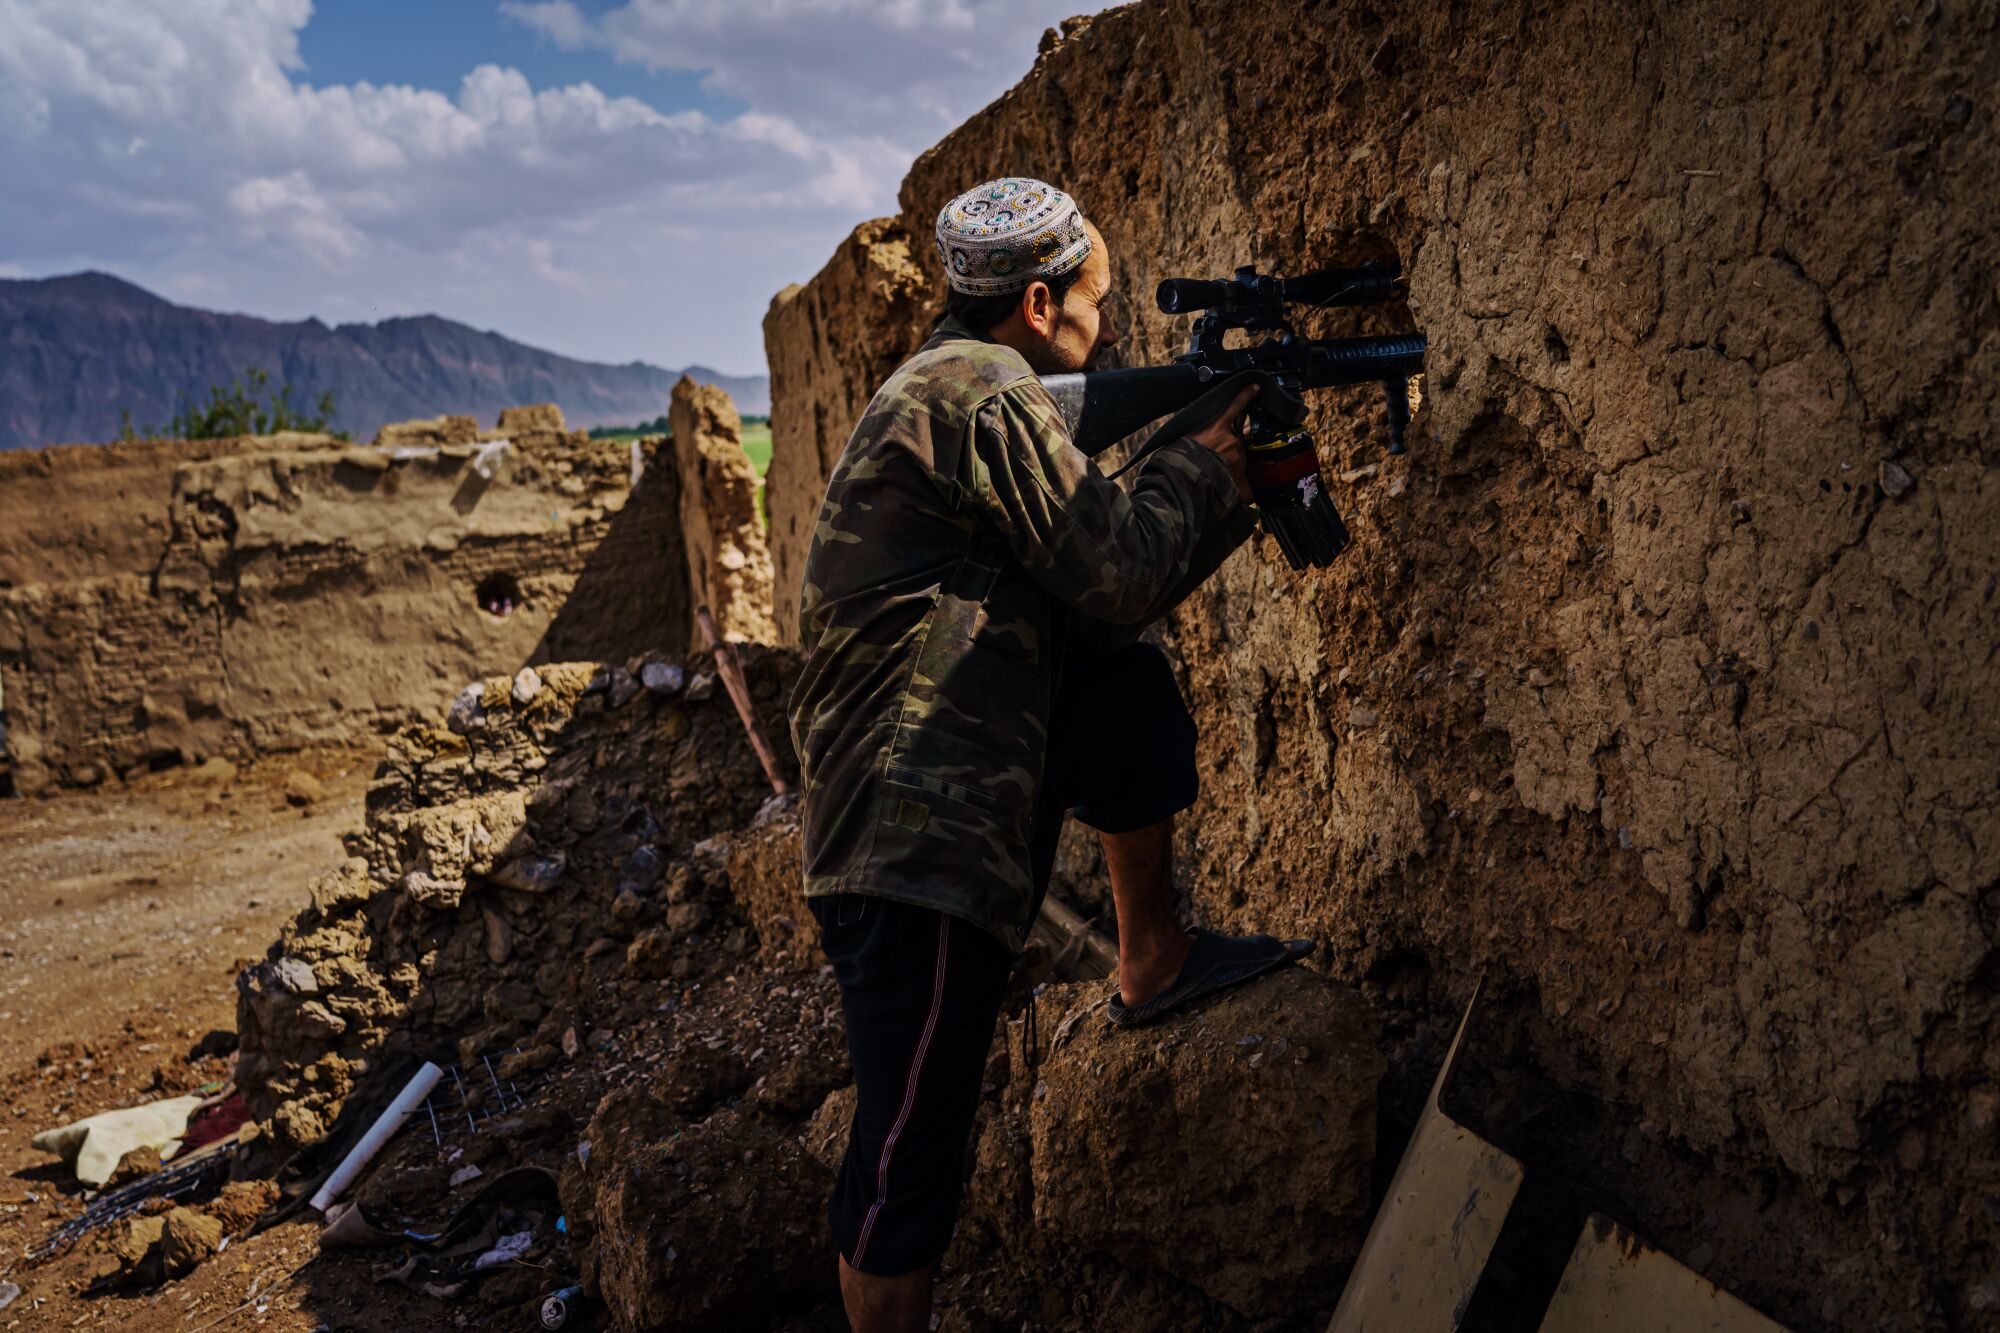 Azimullah Muhamadi holds a weapon and surveys the terrain through a hole in a wall with a sniper scope